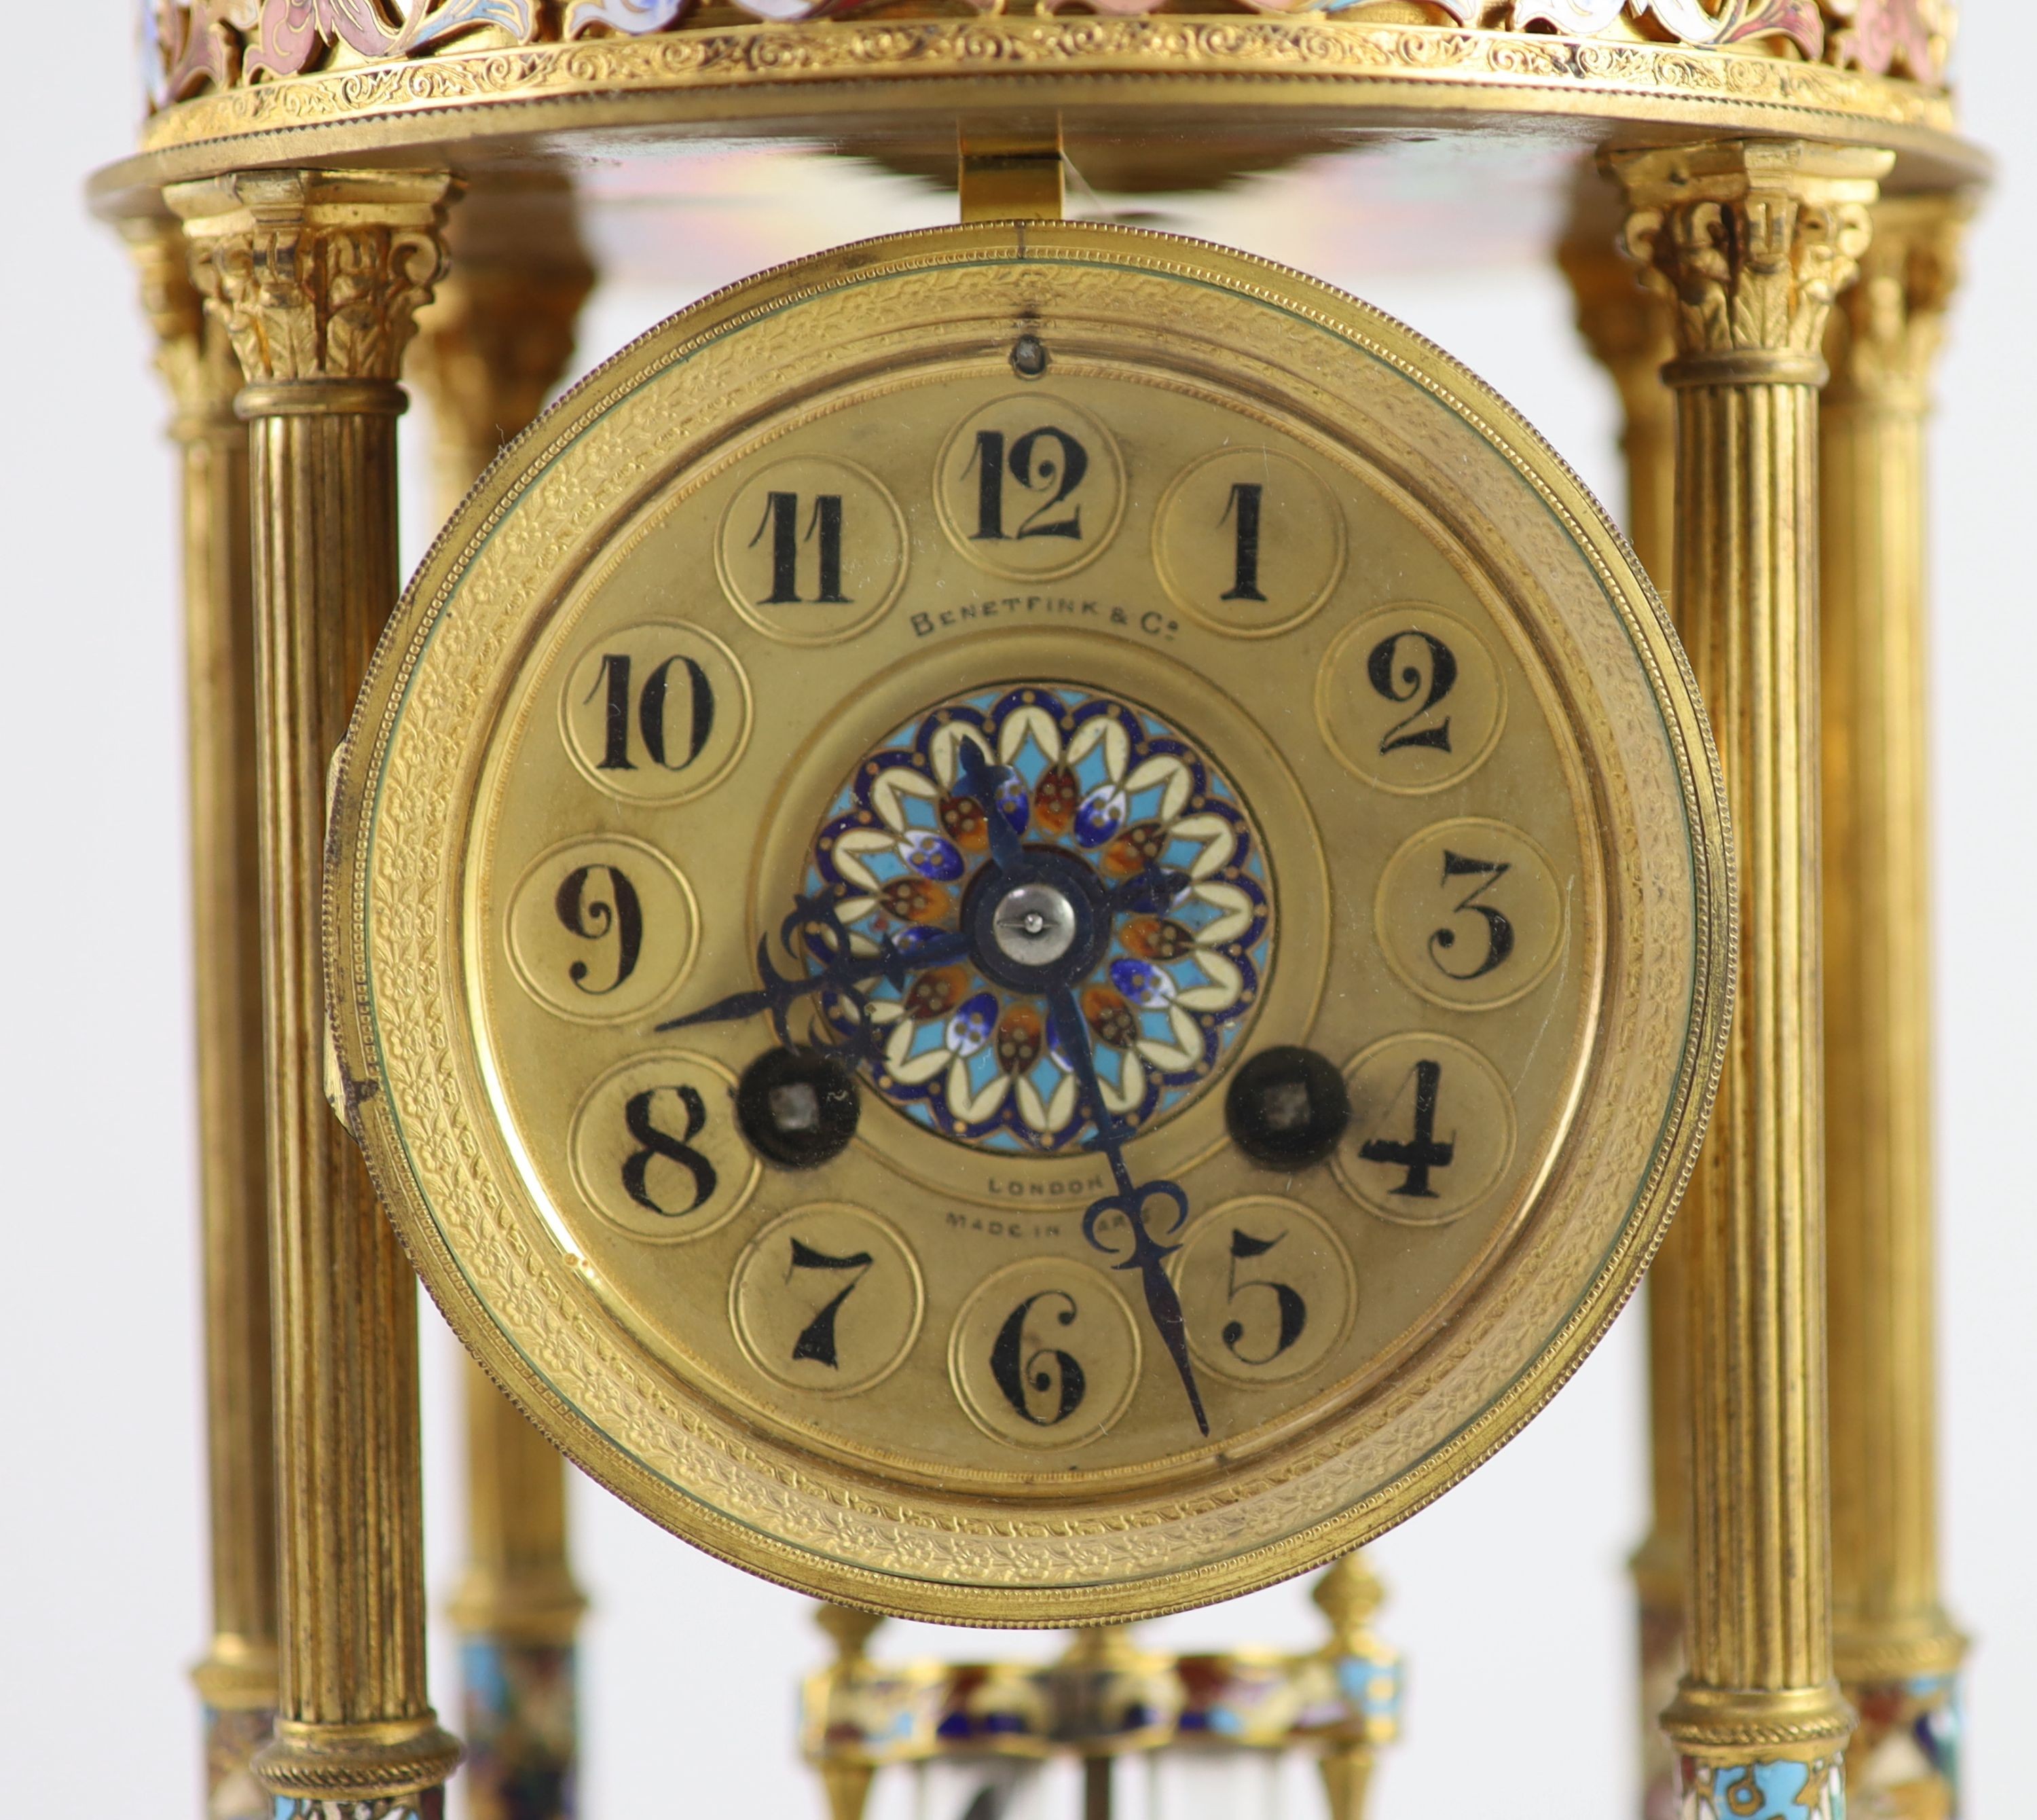 A late 19th century French ormolu and champleve enamel portico clock, height 39cm